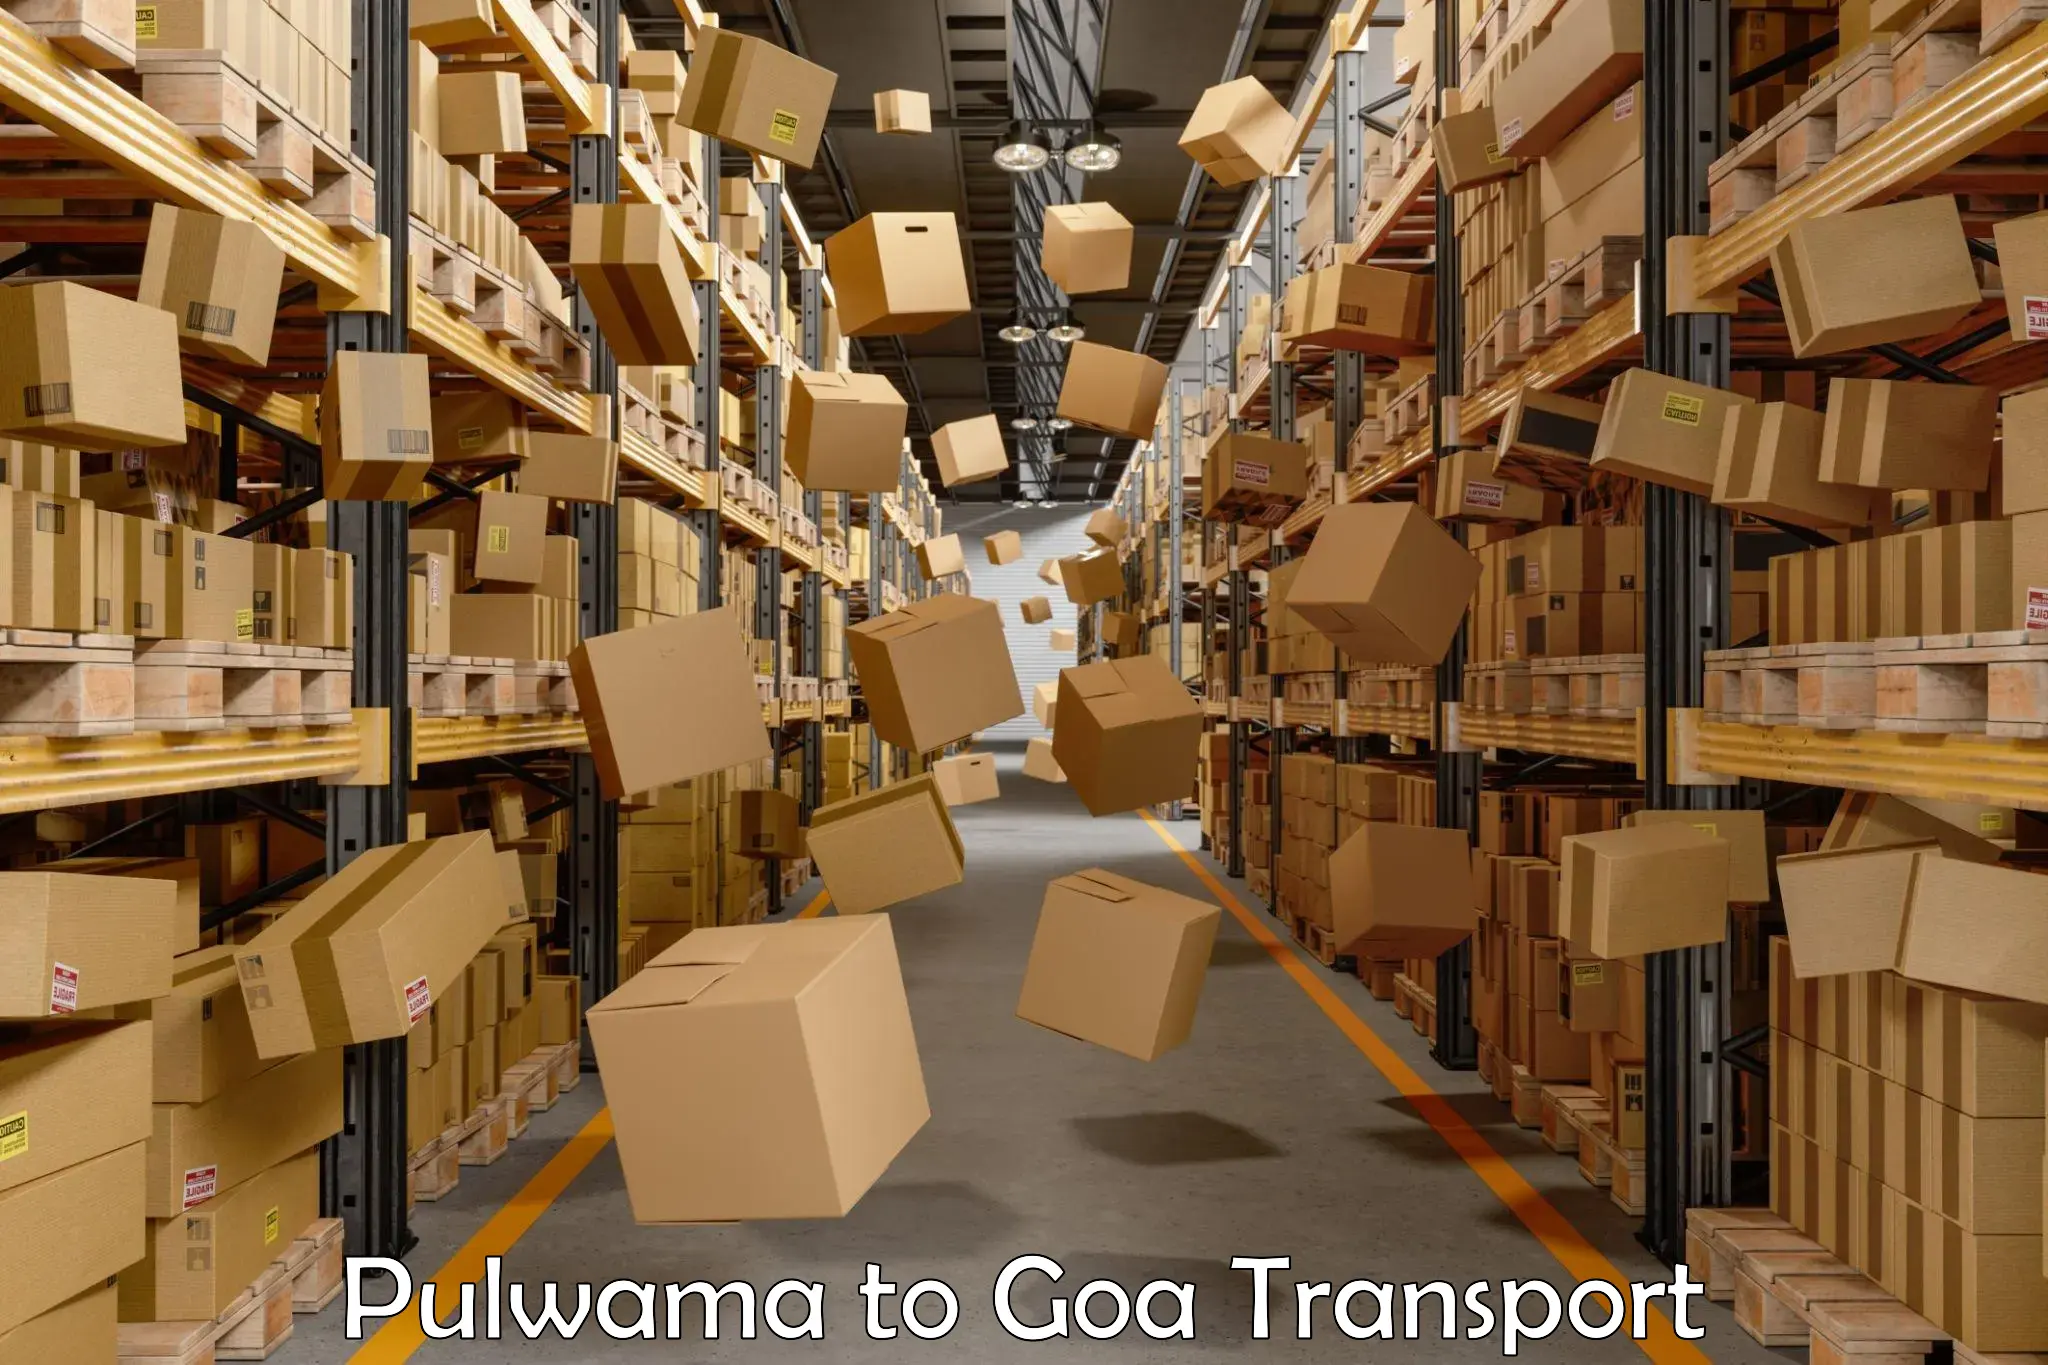 Daily transport service Pulwama to Goa